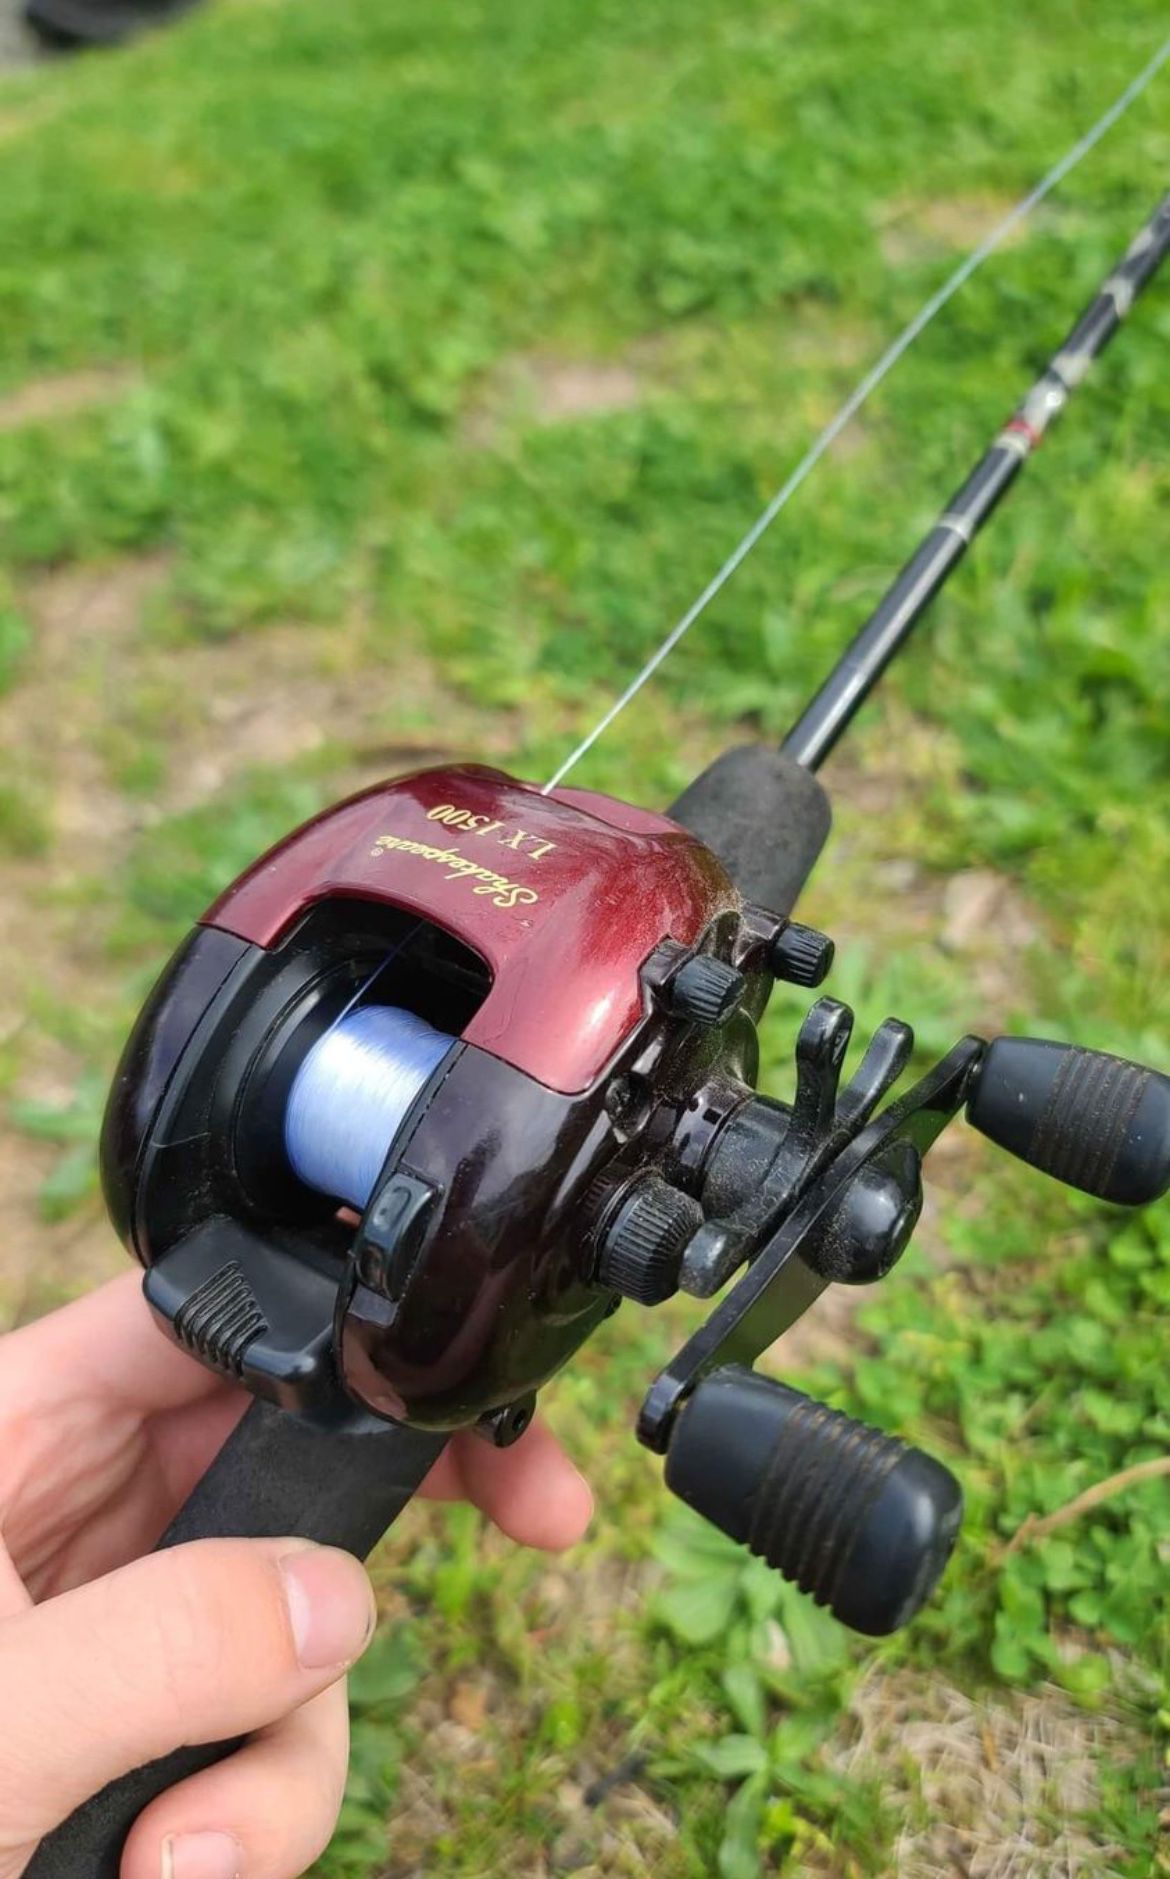 Shakespeare LX 1500 Fishing reel and a rod